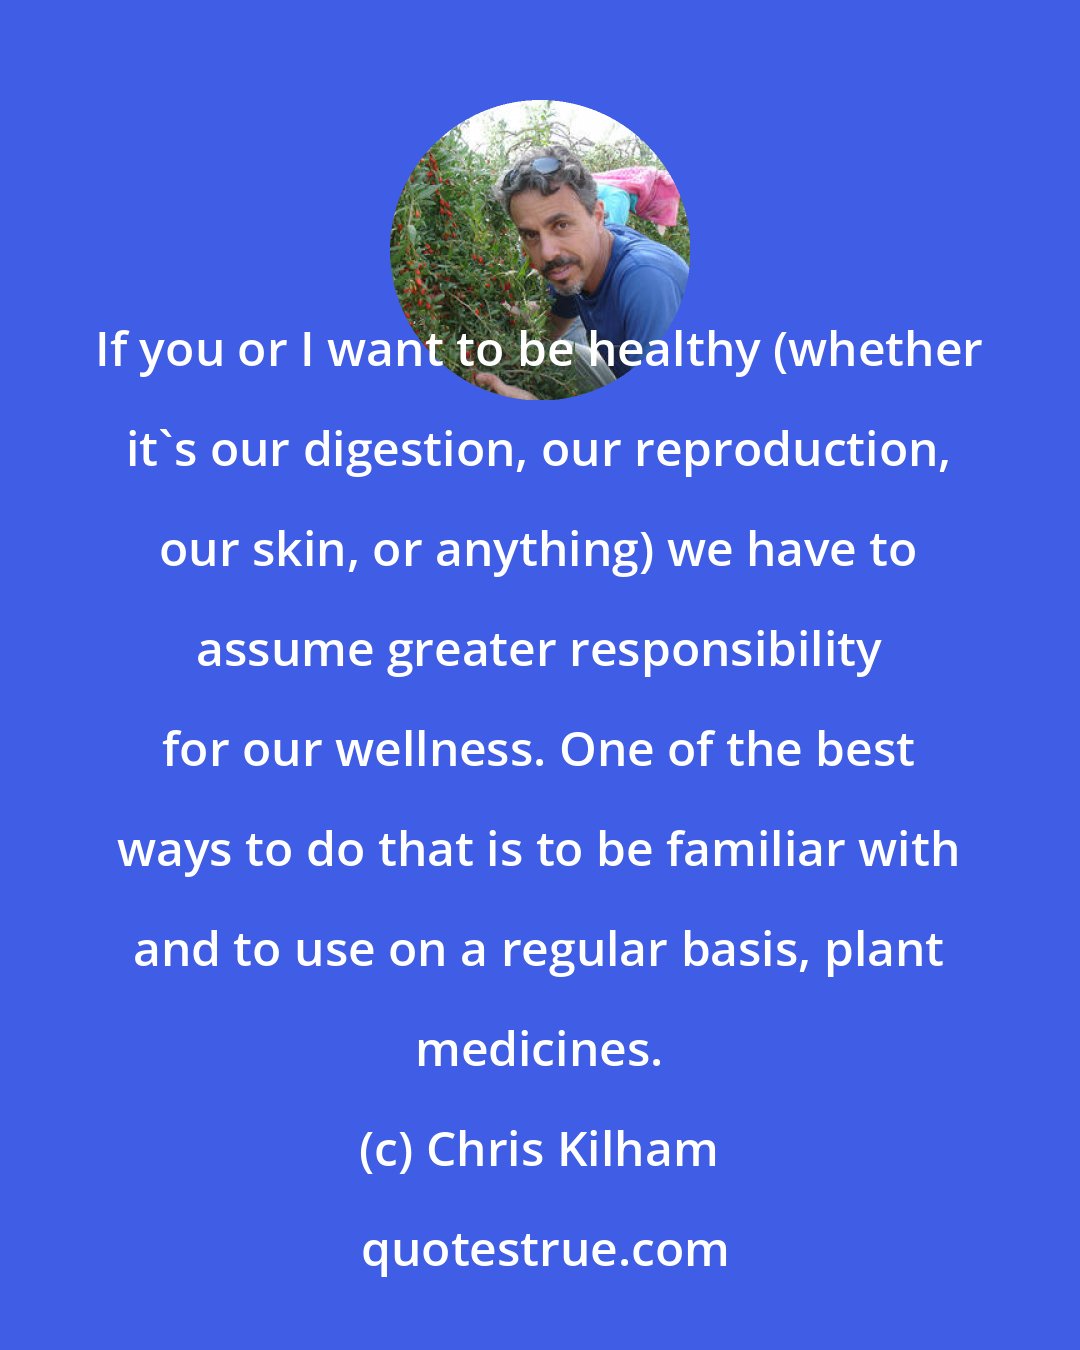 Chris Kilham: If you or I want to be healthy (whether it's our digestion, our reproduction, our skin, or anything) we have to assume greater responsibility for our wellness. One of the best ways to do that is to be familiar with and to use on a regular basis, plant medicines.